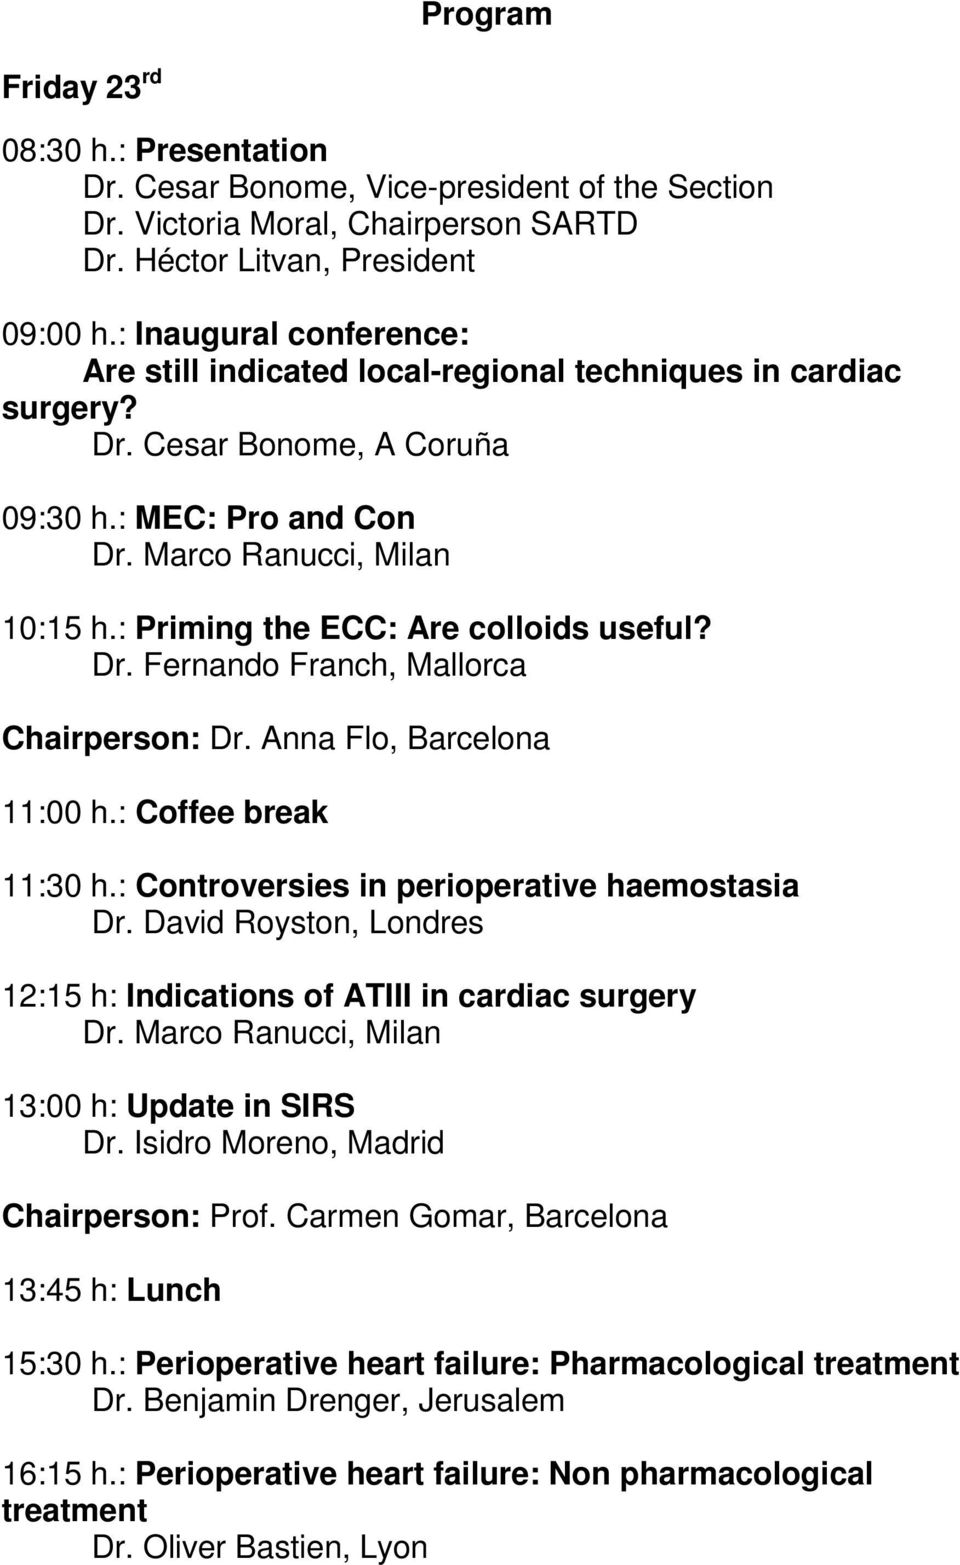 Anna Flo, Barcelona 11:00 h.: Coffee break 11:30 h.: Controversies in perioperative haemostasia Dr. David Royston, Londres 12:15 h: Indications of ATIII in cardiac surgery 13:00 h: Update in SIRS Dr.